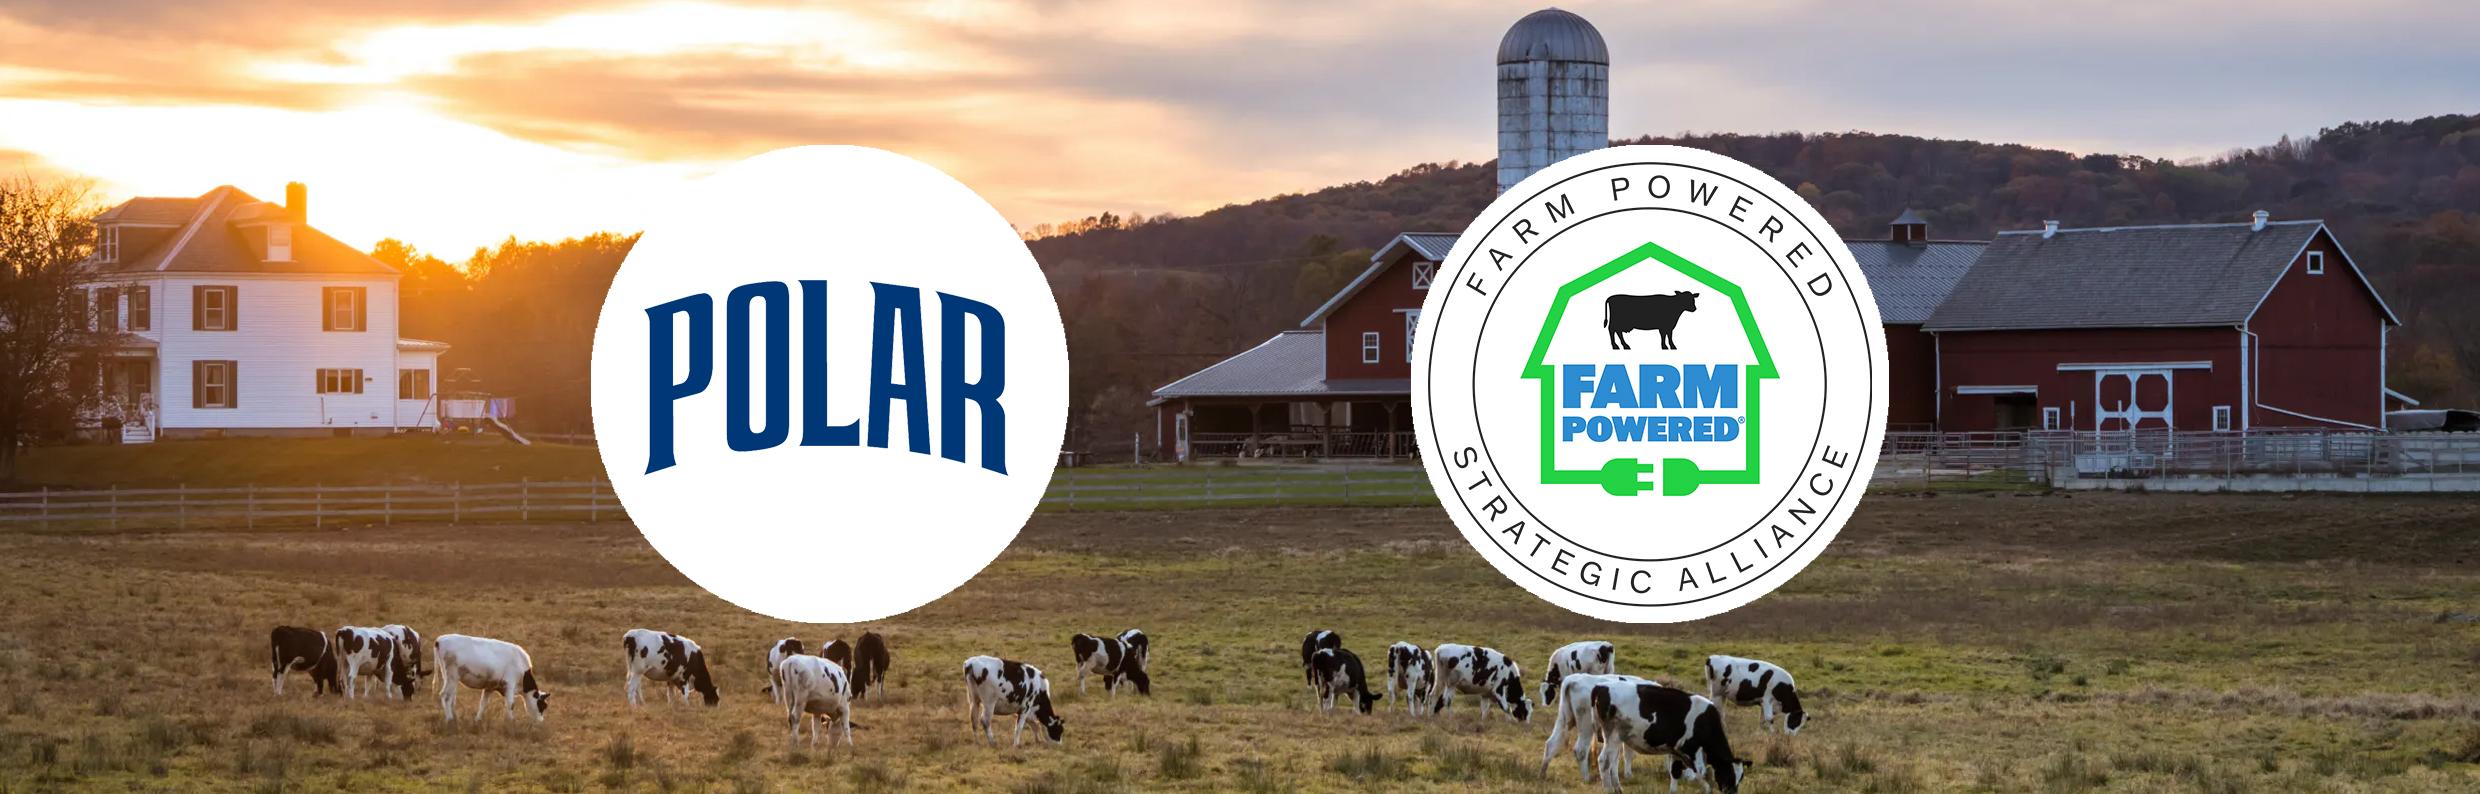 Logos of Polar and Farm Powered Strategic Alliance, with a background image of a farm using anaerobic digestion